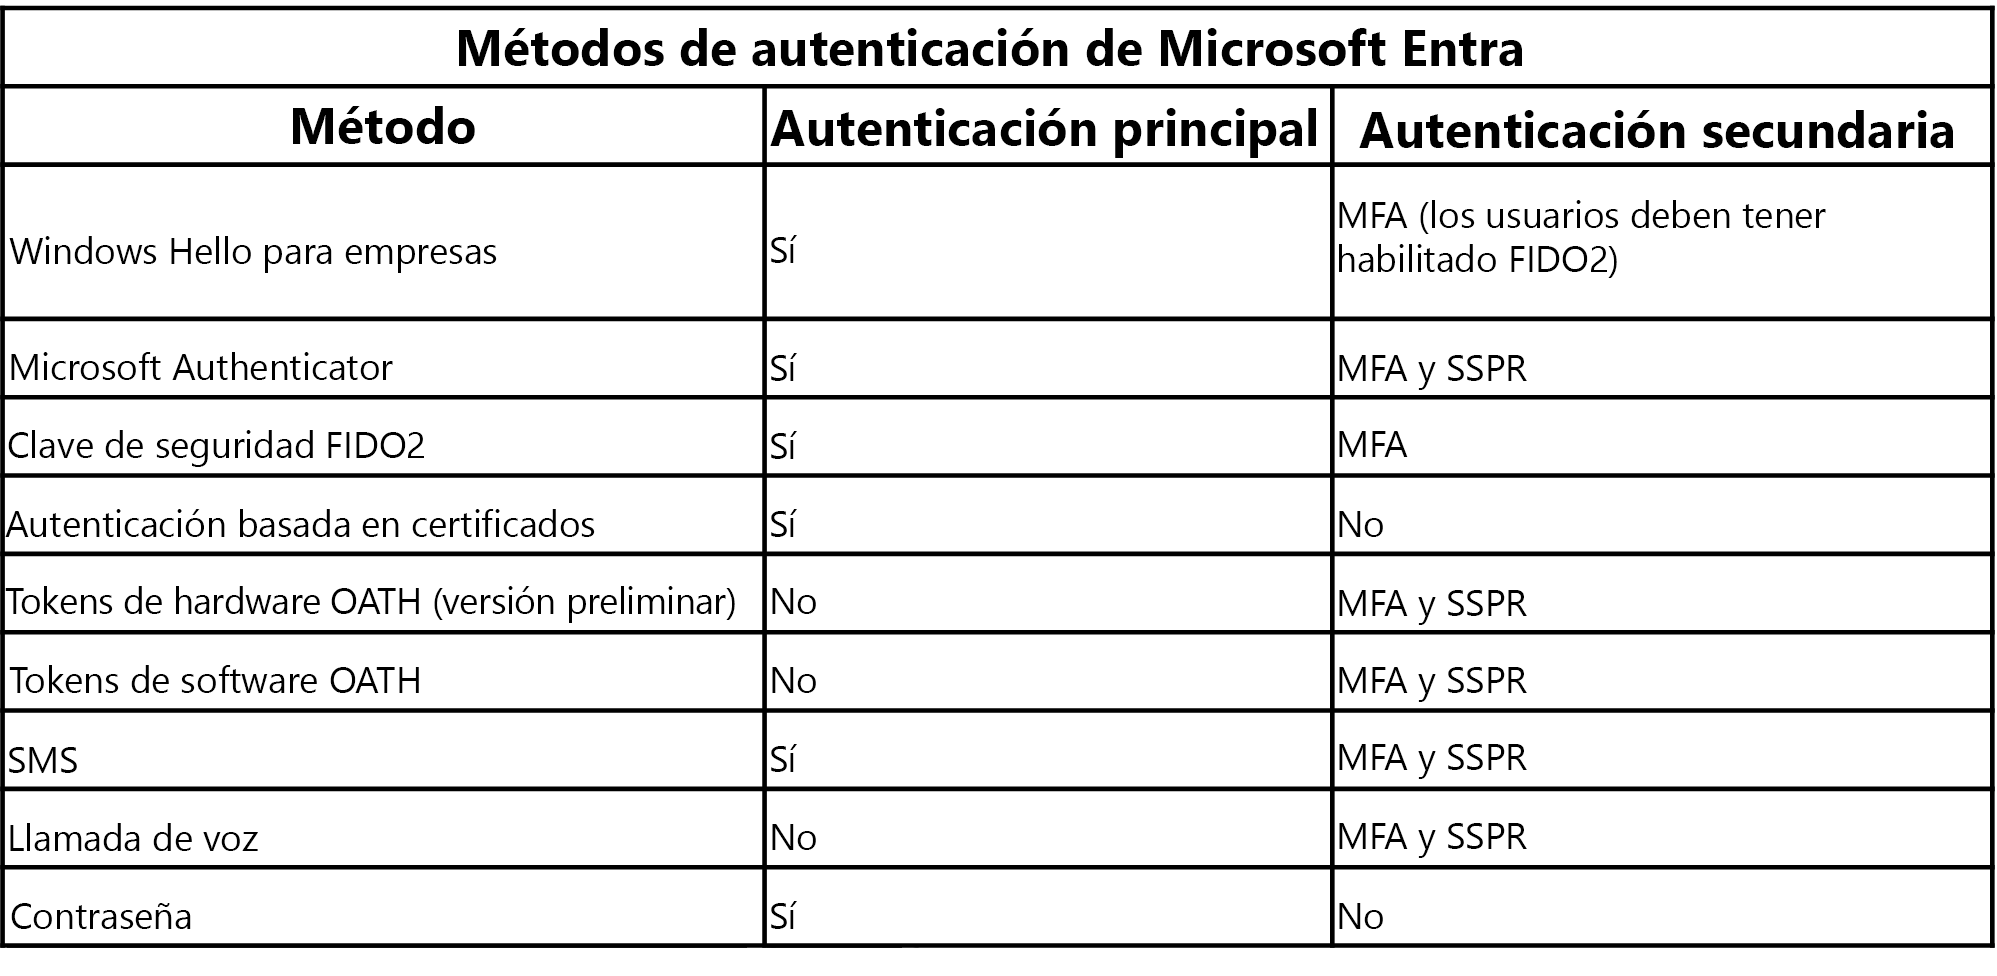 Screen capture of a table that summarizes if authentication method is used for primary and/or secondary authentications.